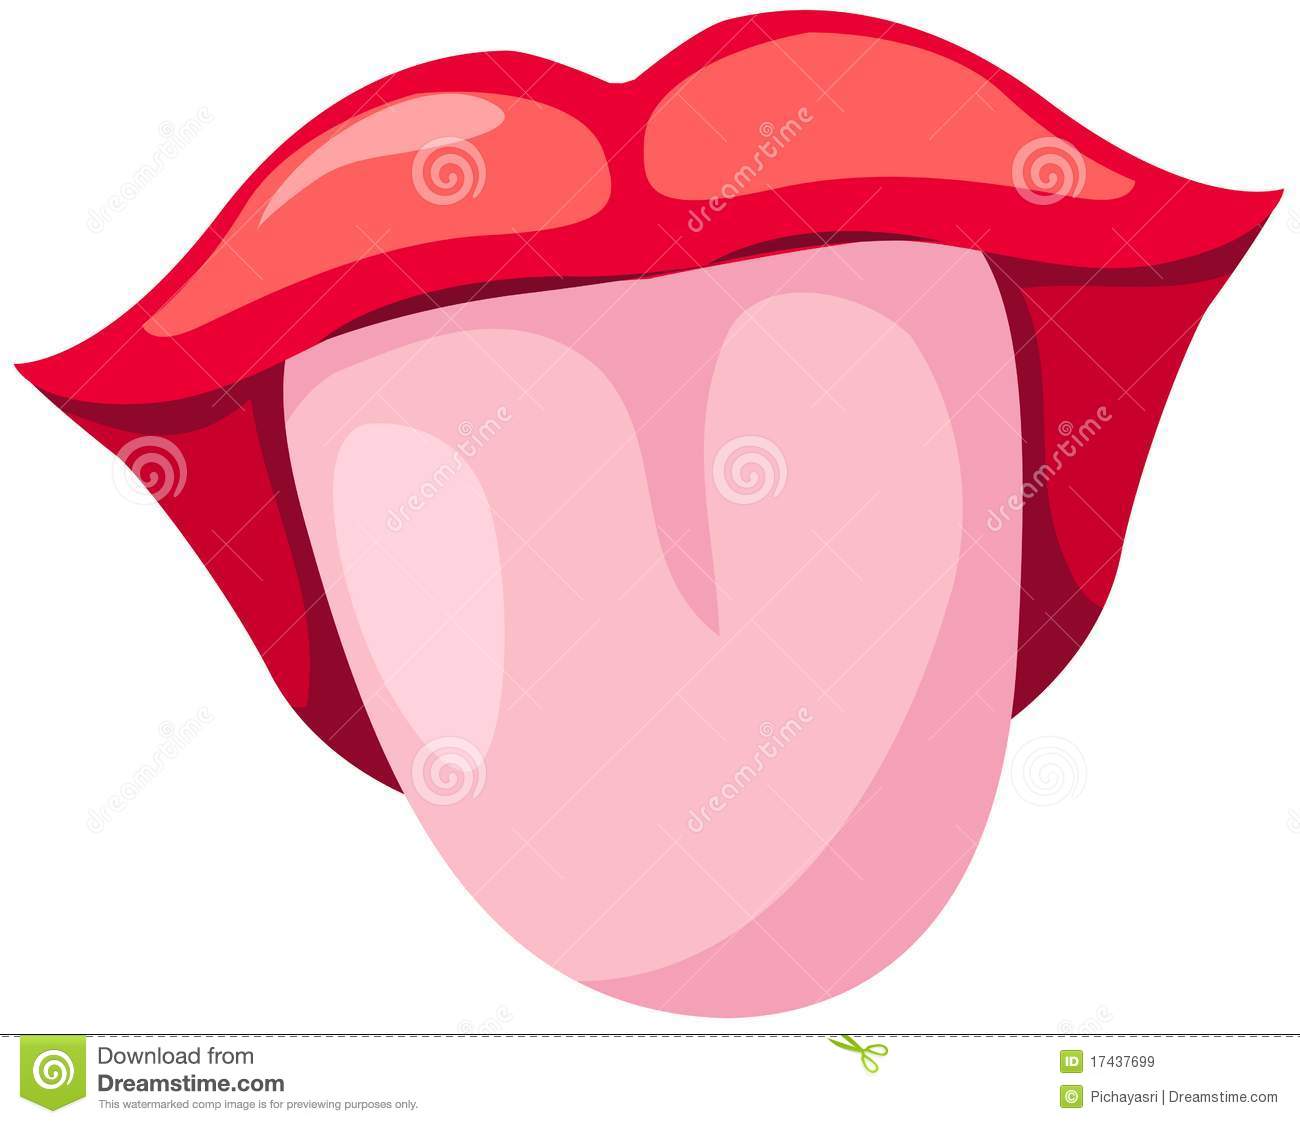 word of mouth clipart - photo #43